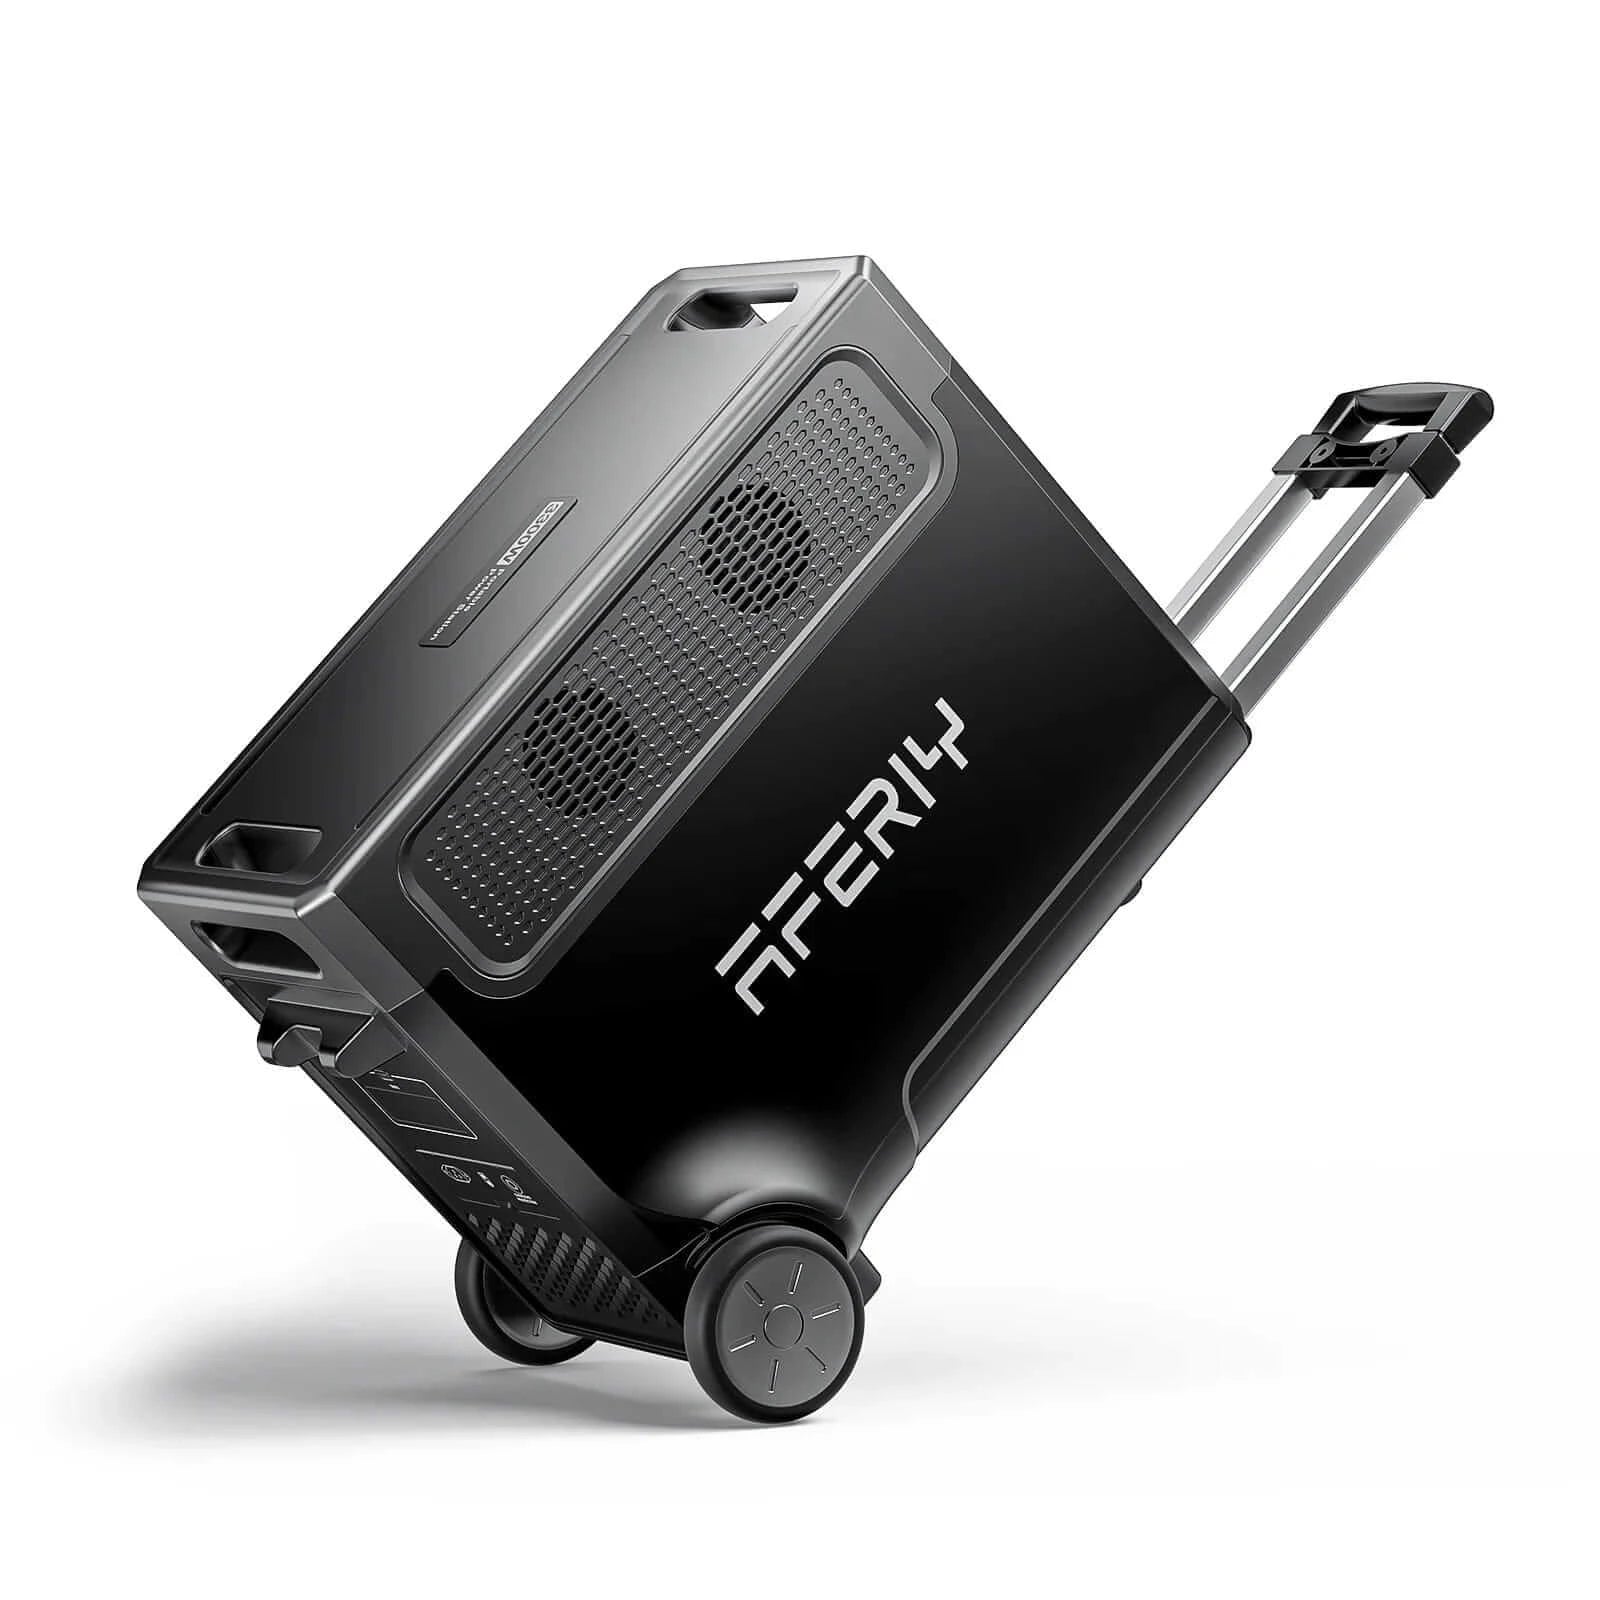 AFERIY AF P110 Portable Power Station Review - Motorhome And Camping